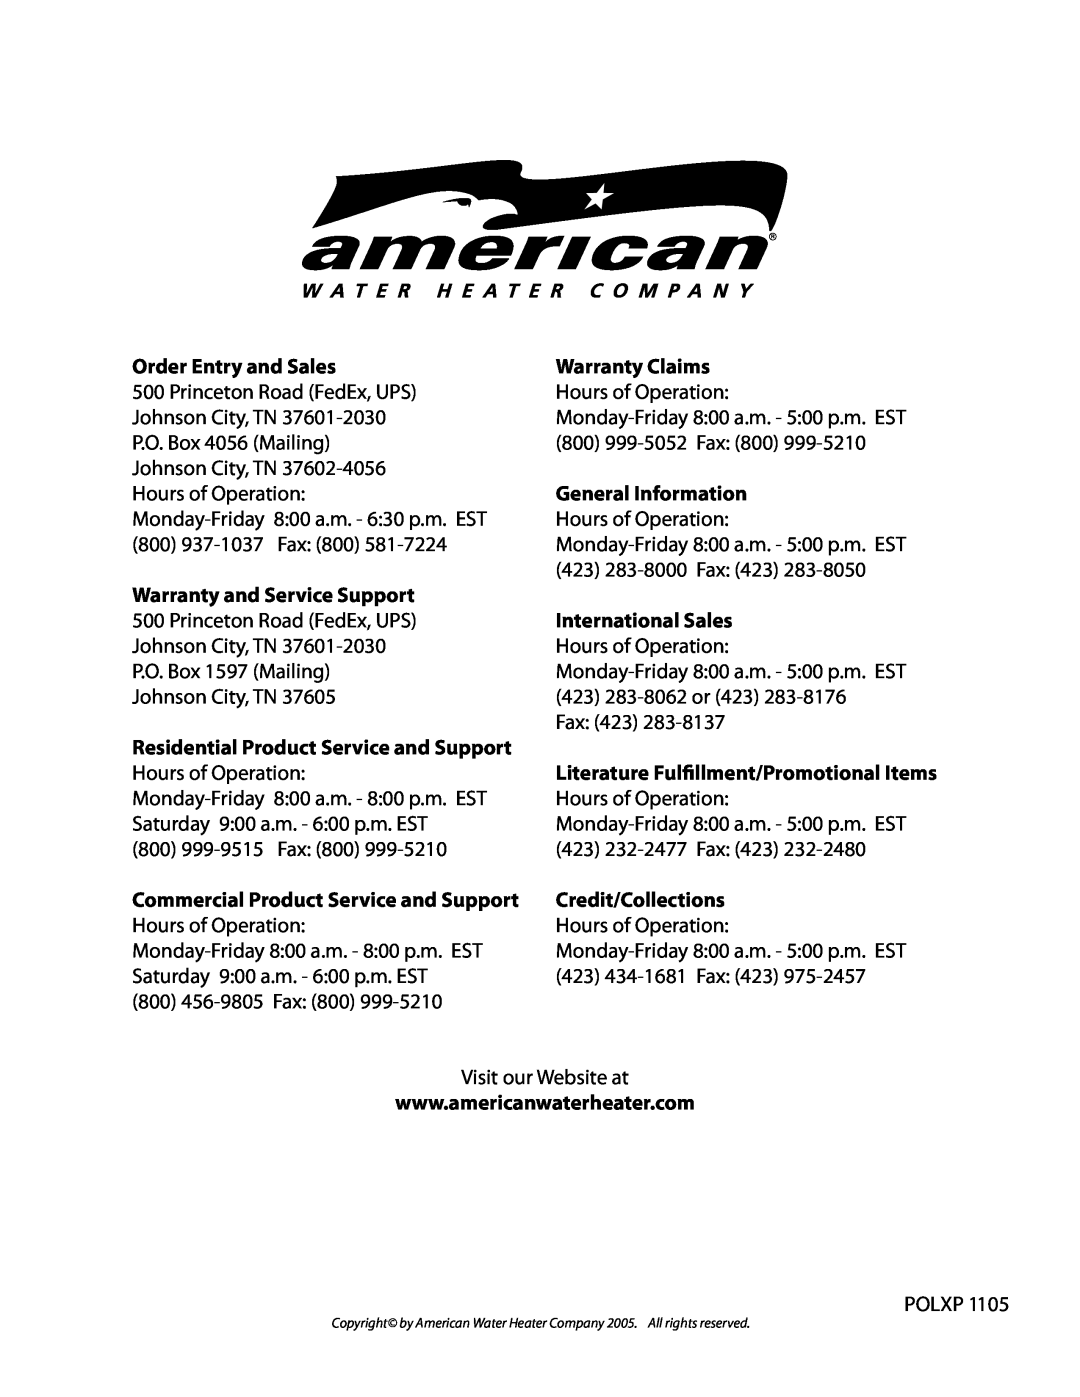 American Water Heater plus PR Order Entry and Sales, Warranty Claims, General Information, Warranty and Service Support 